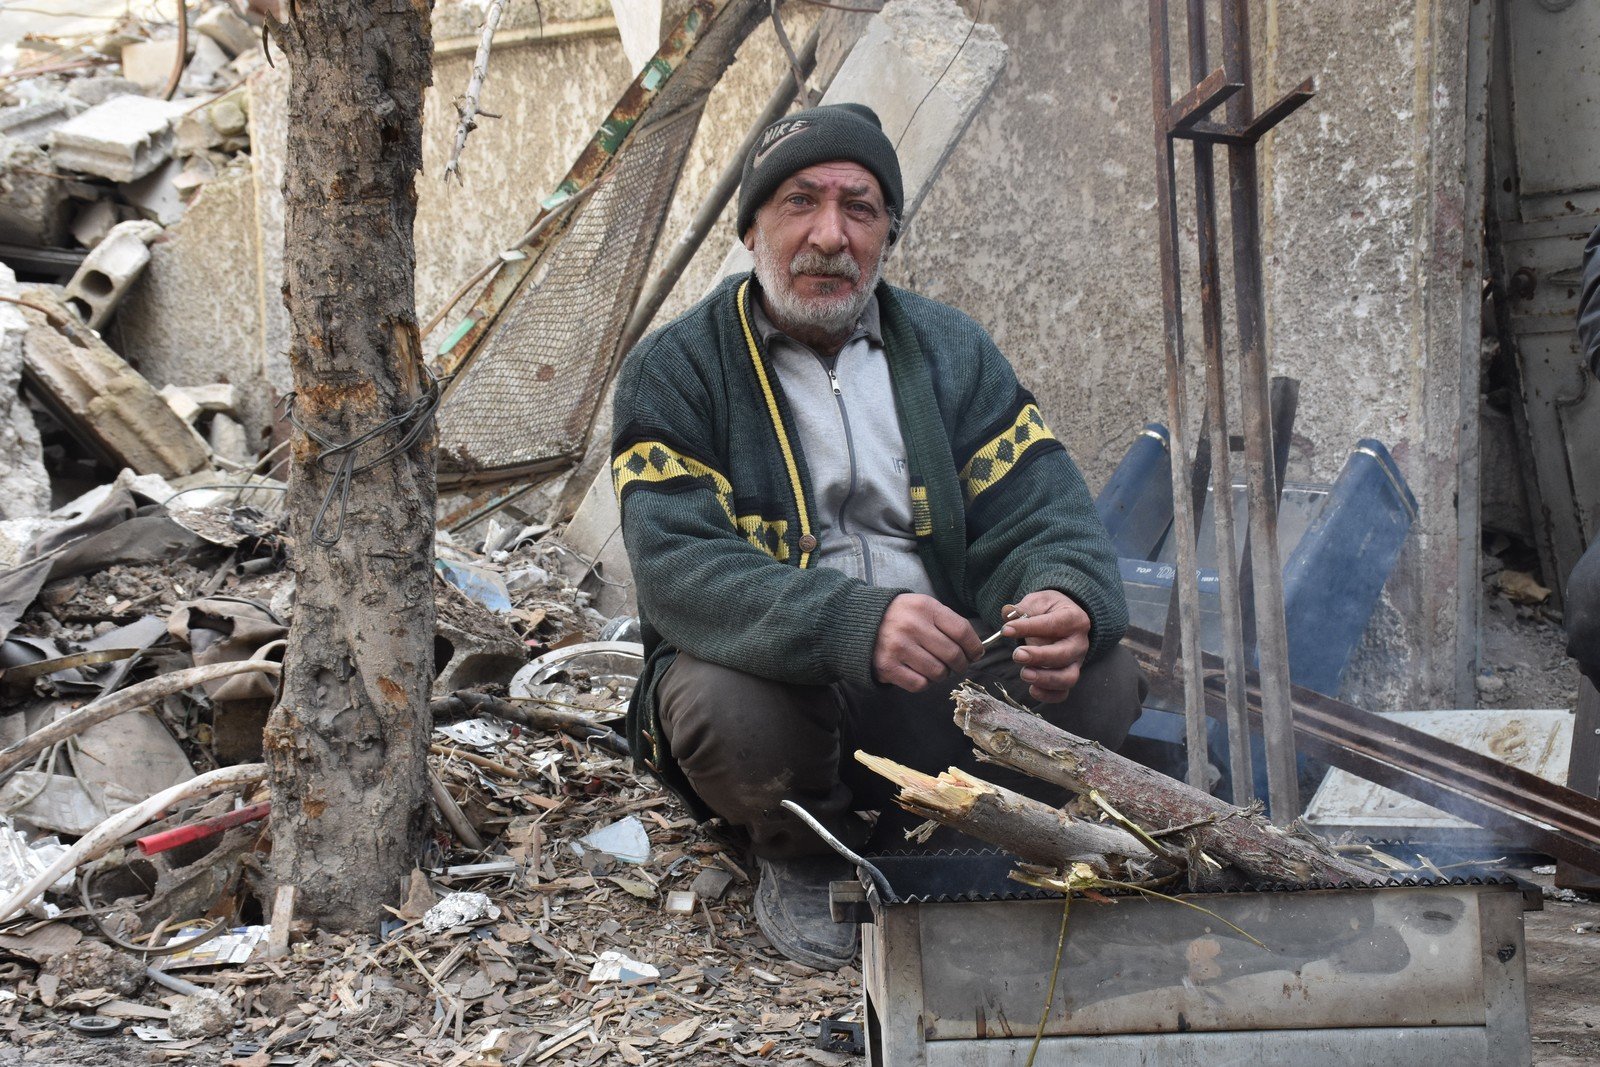 Mohammad, 66, sits in front of his home in Eastern Ghouta. He and his family survived the 5-year battle but now face threats of a different kind. The war-damaged water infrastructure. lack of maintenance and limited power supply have hindered people's access to drinking water. By rehabilitating three wells in different locations in Eastern Ghouta, Oxfam has helped provide people like Mohammad with clean and safe water. (Photo: Dania Kareh / Oxfam)